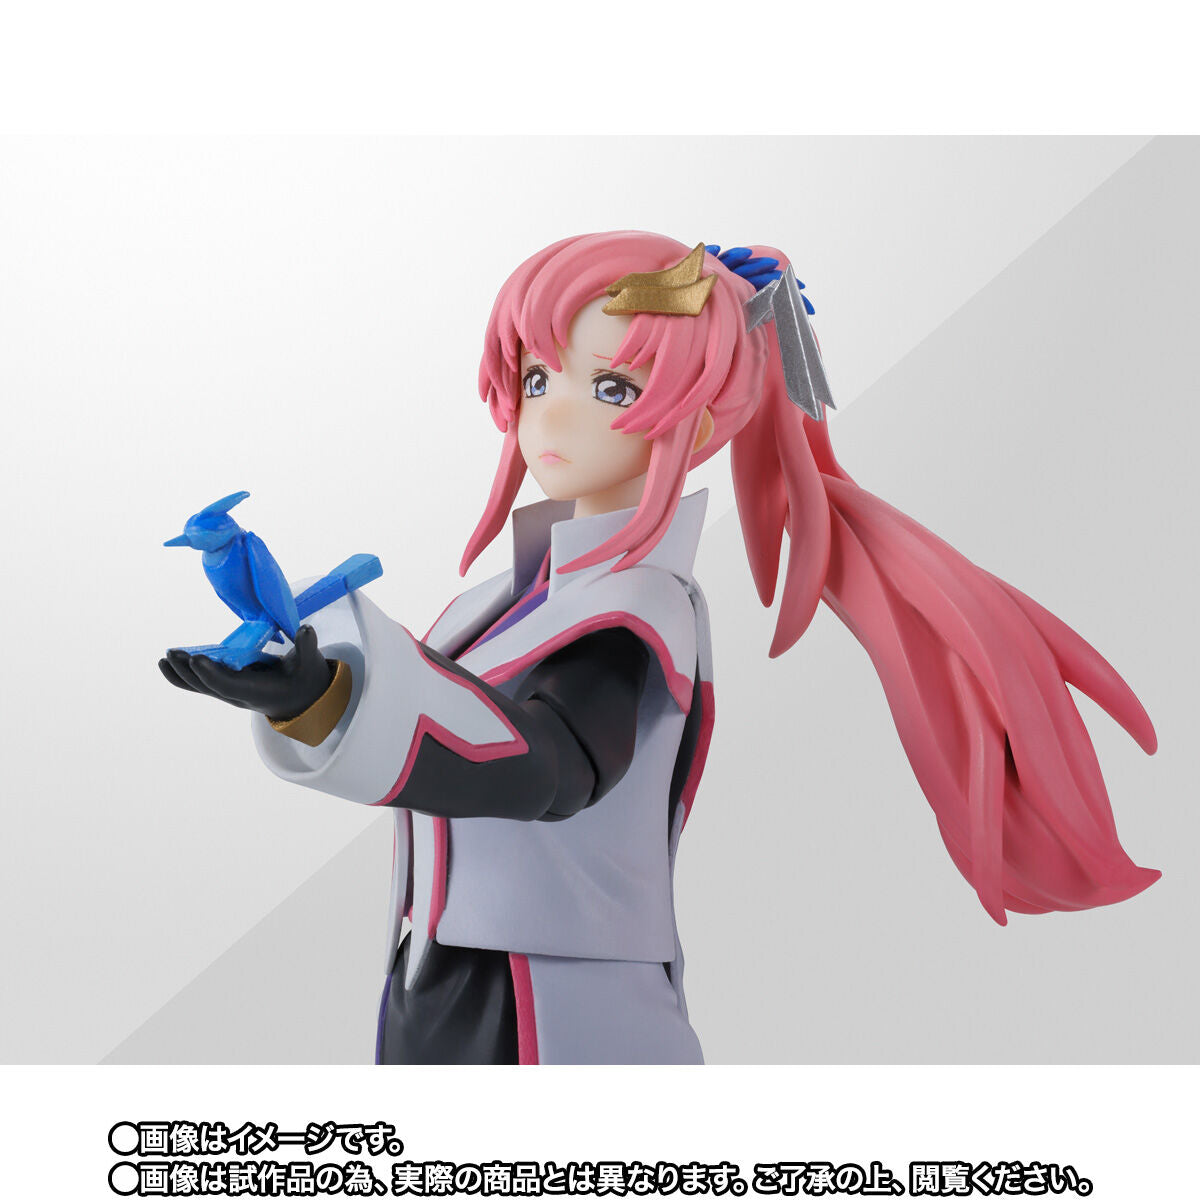 SPECIAL ORDER Bandai - S.H.Figuarts - Mobile Suit Gundam SEED Freedom - Lacus Clyne: Compass Battle Surcoat Ver. [EXCLUSIVE] [JP]